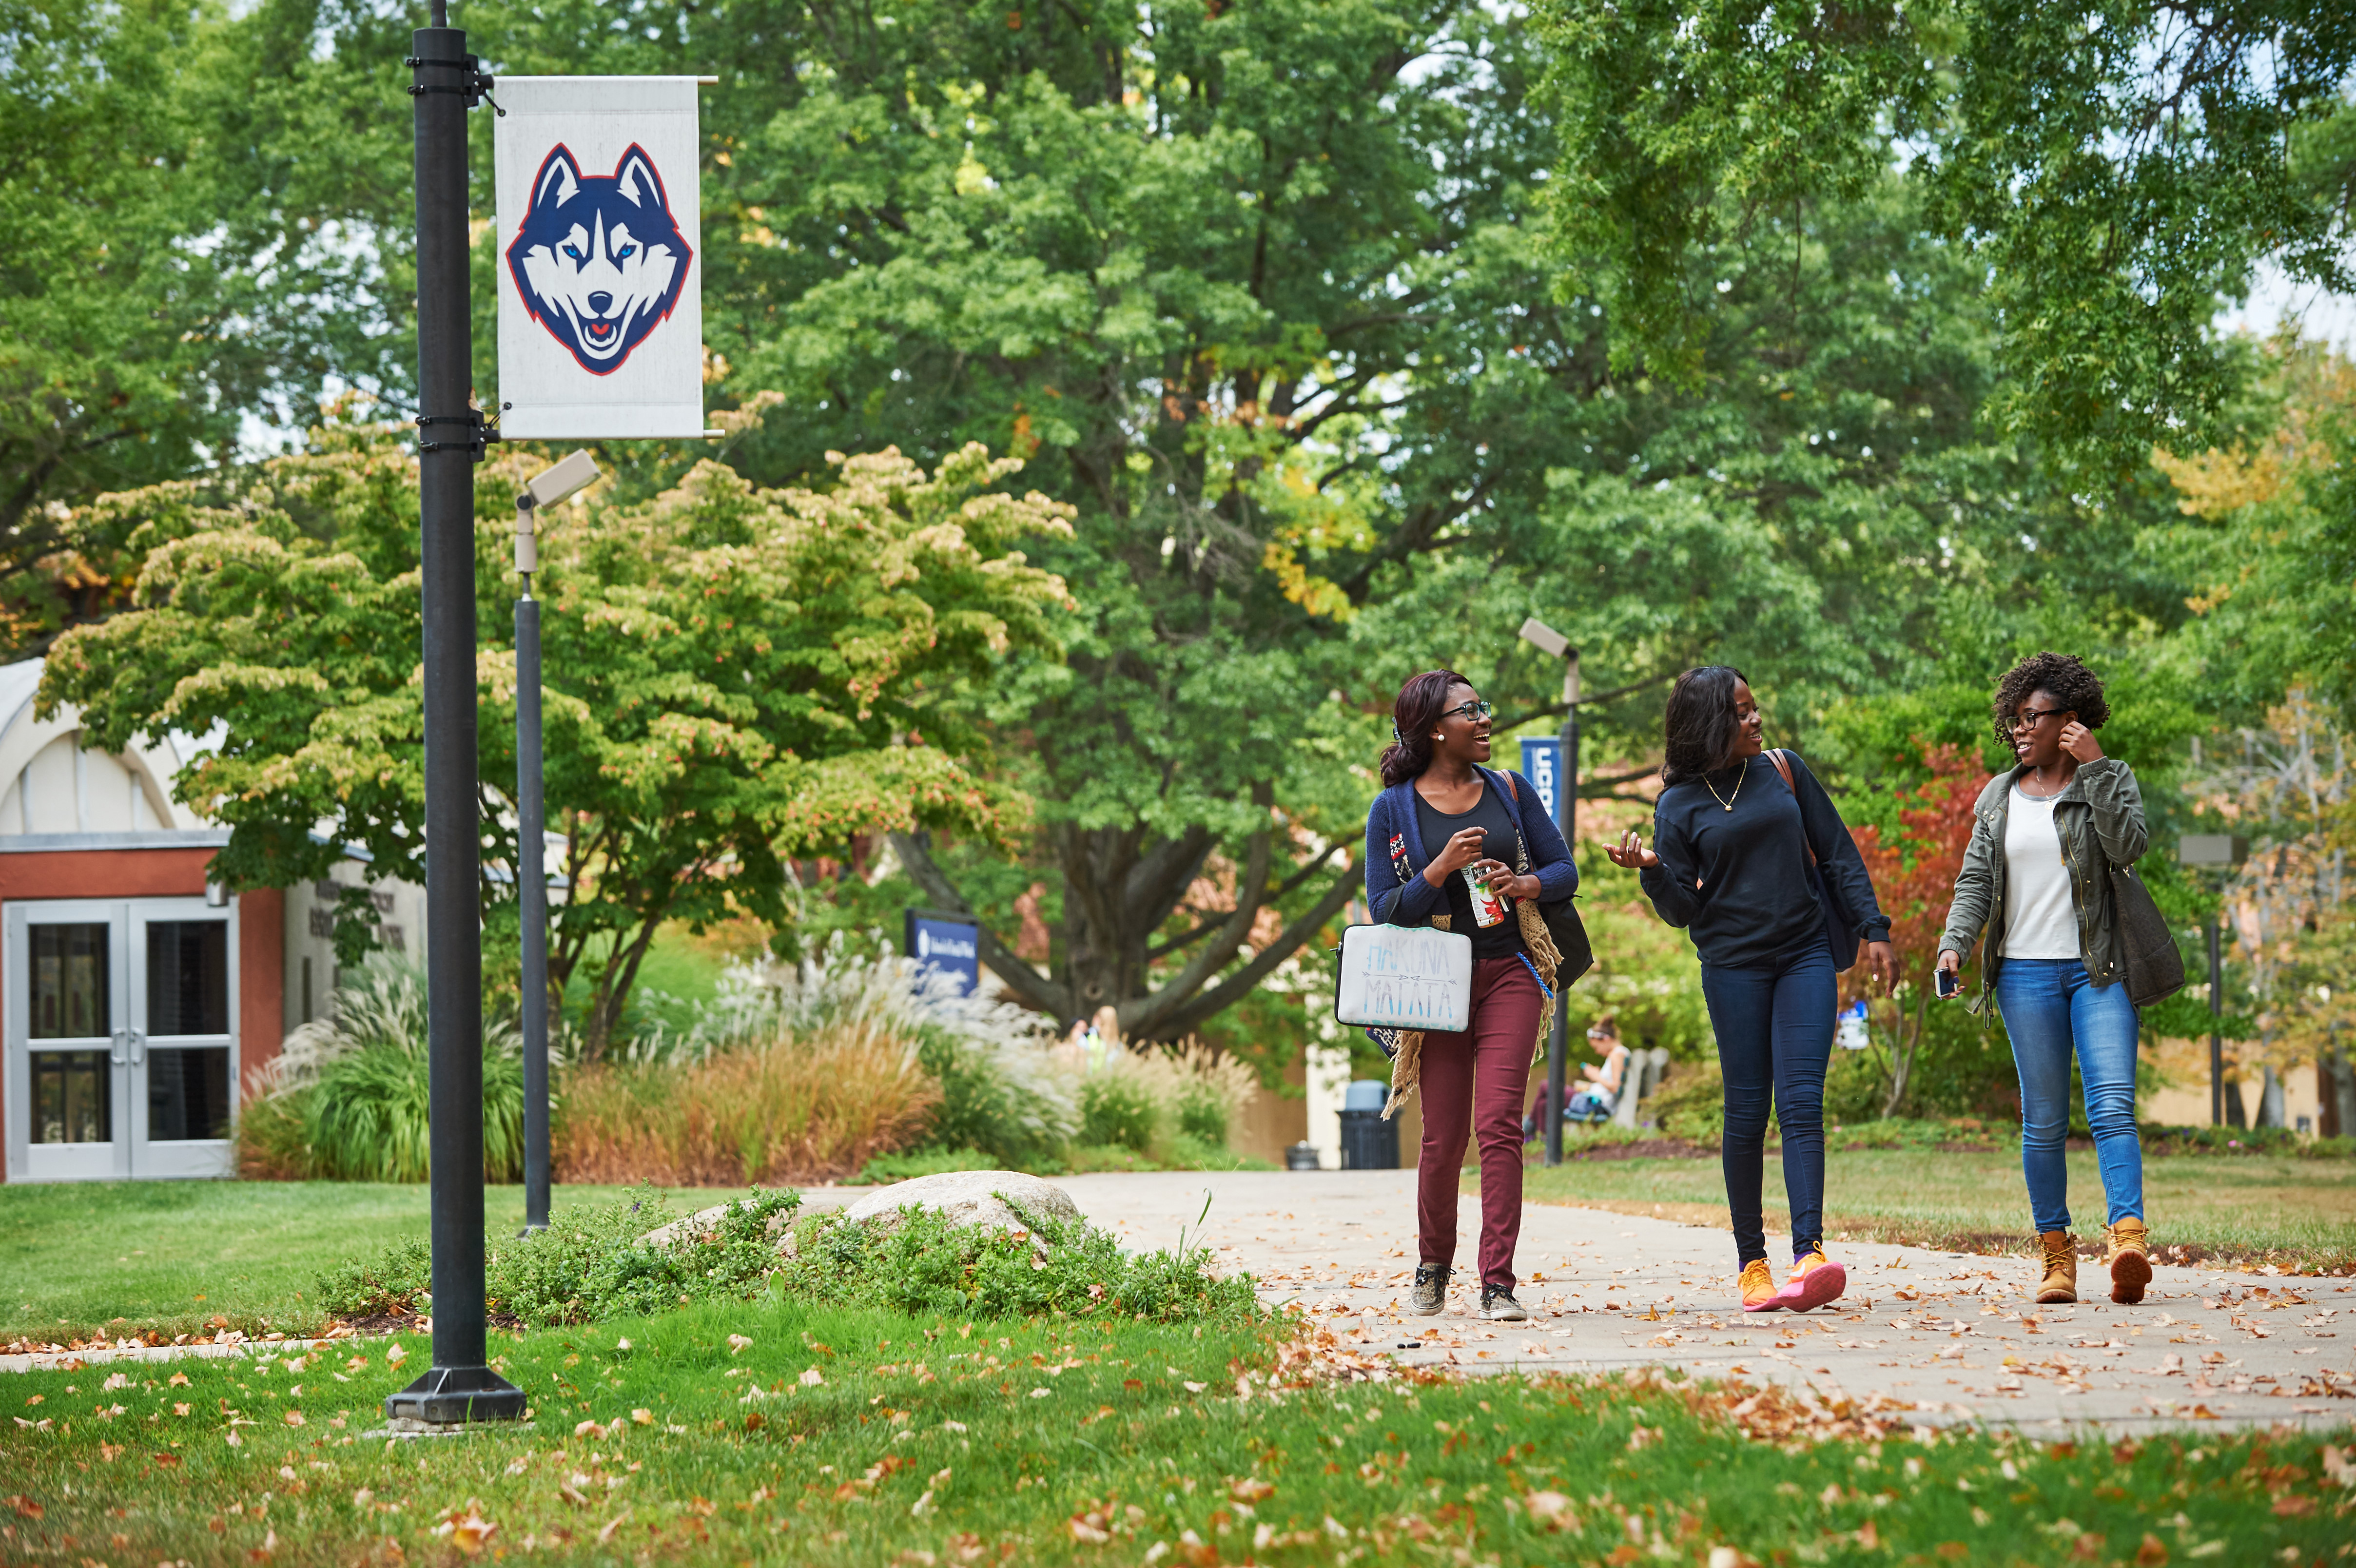 In this 2015 photo, students walk outdoors near banners on the Hartford campus. (Peter Morenus/UConn Photo)